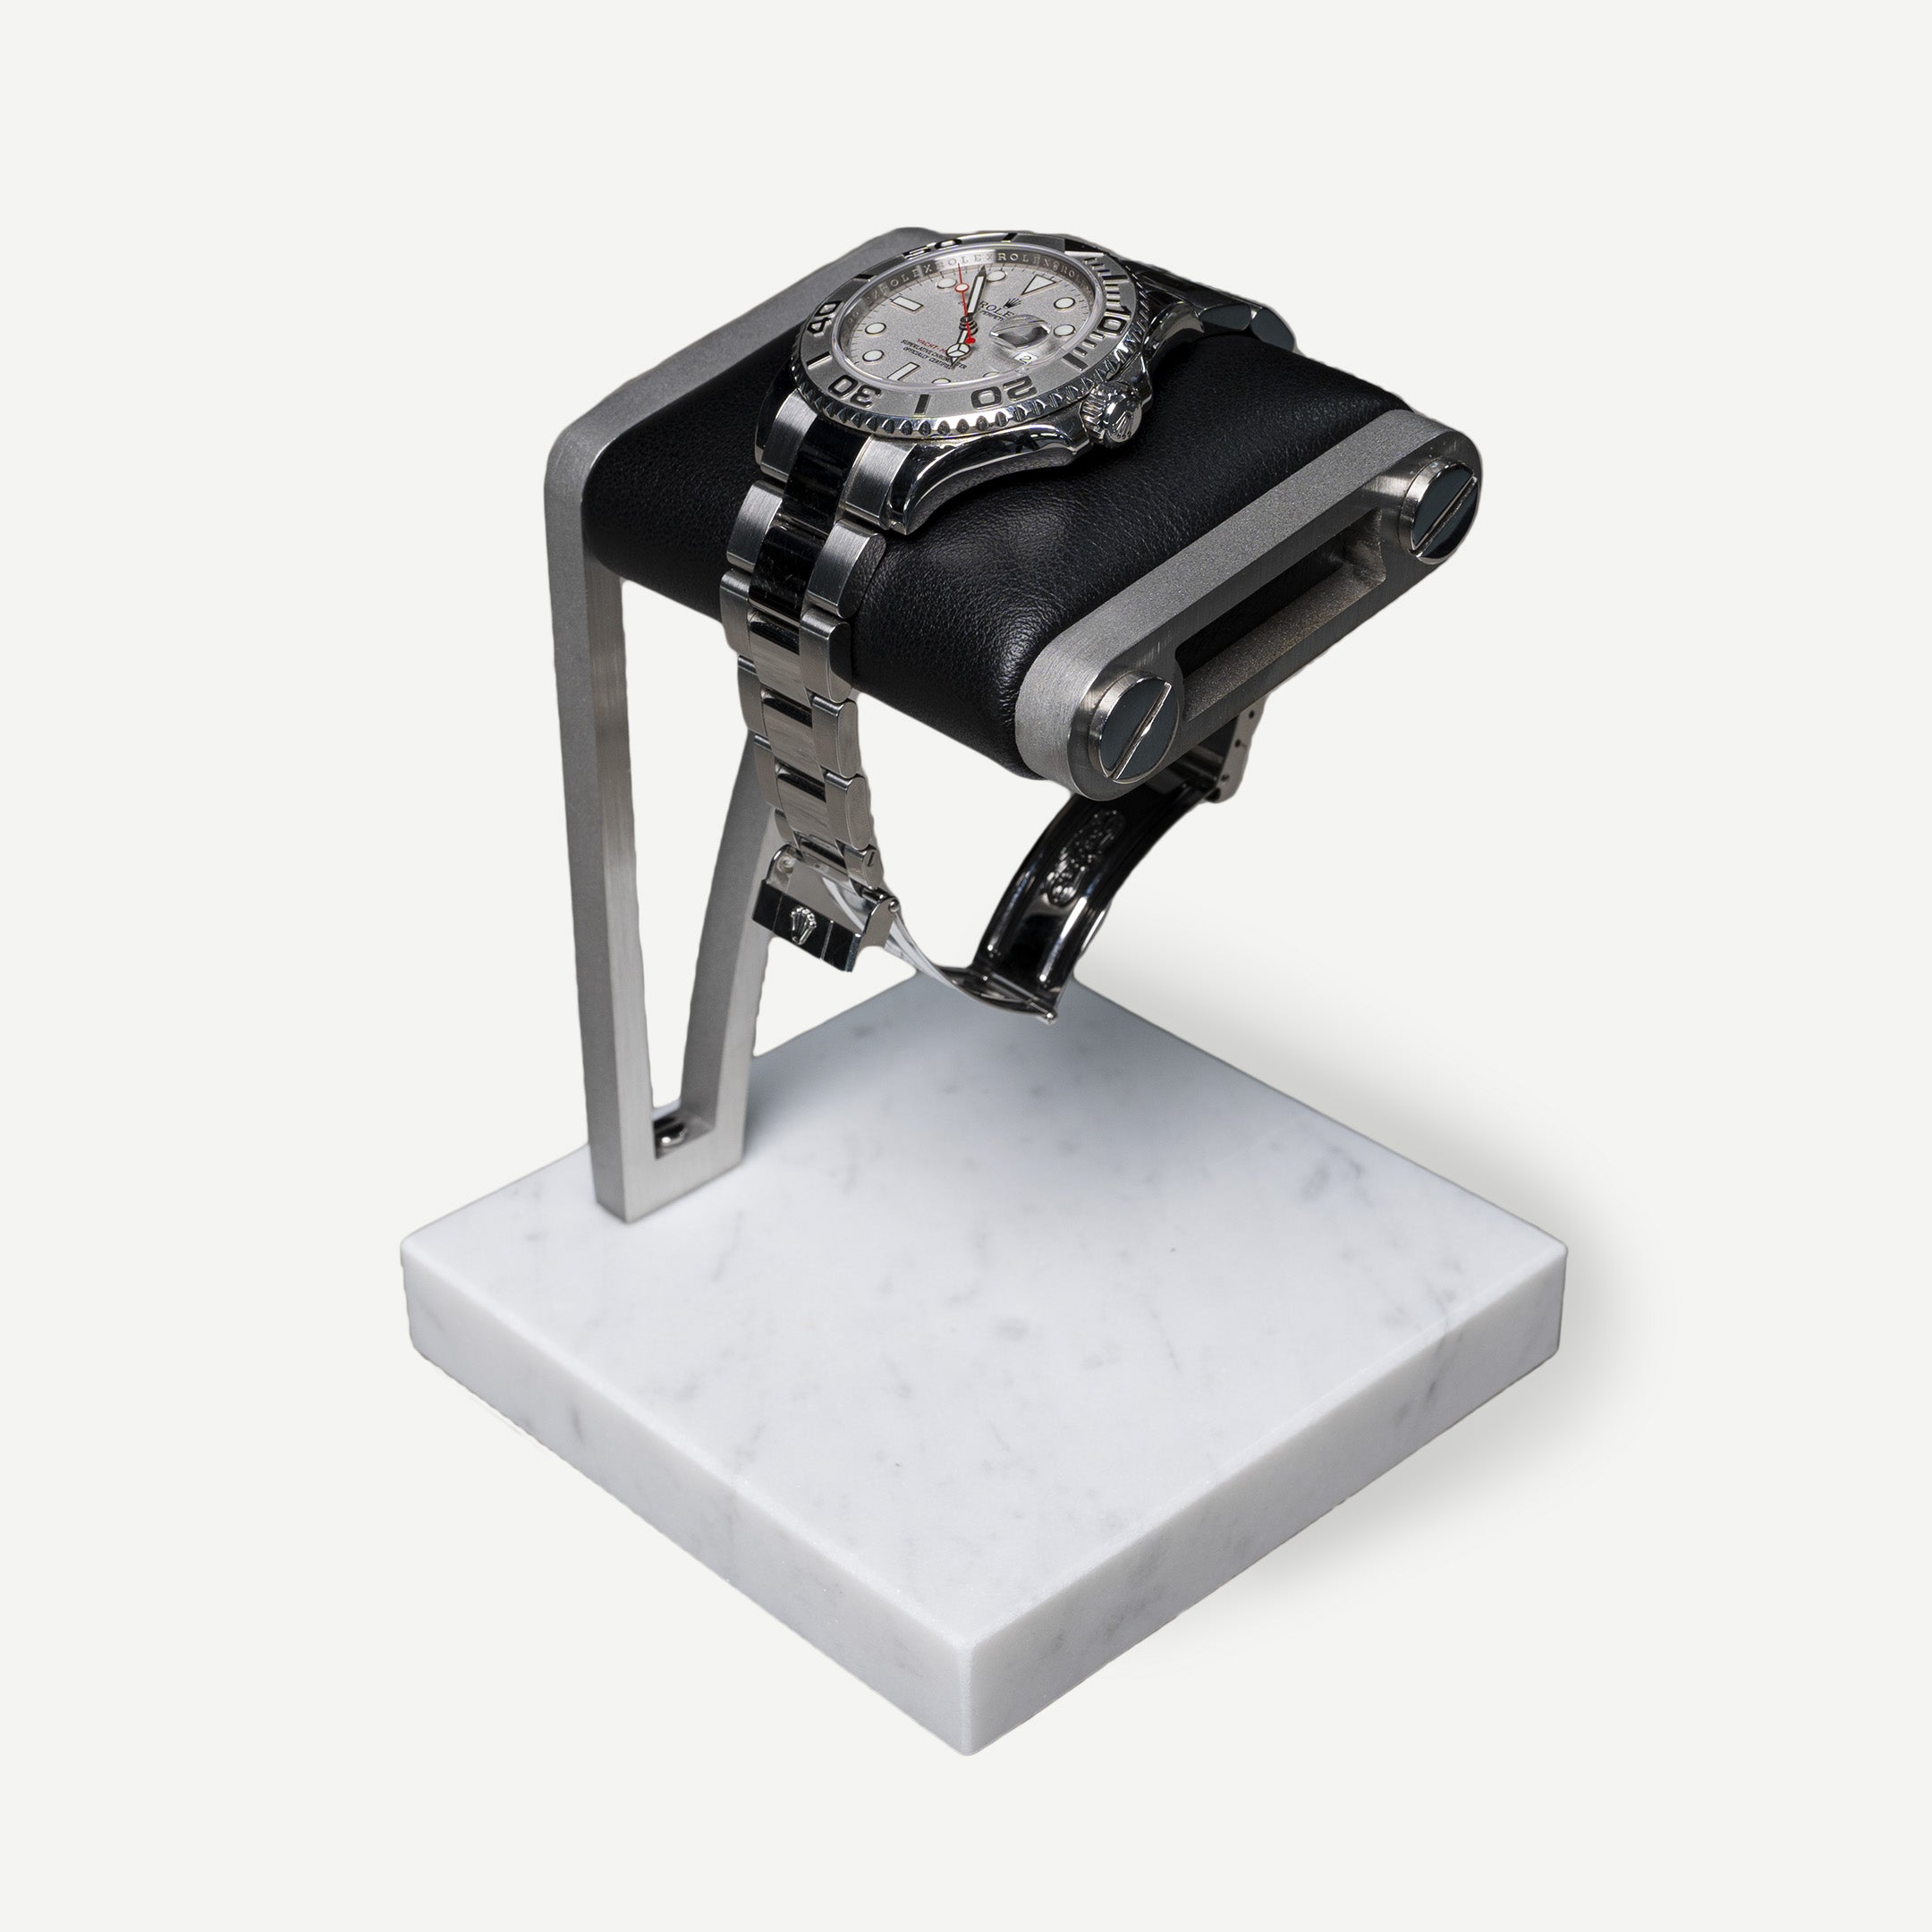 Next generation watch stand, the watch stand 2.0 - white marble black cusion, italian calfskin leather, carrara marble base plate, watch display, how to display your watches